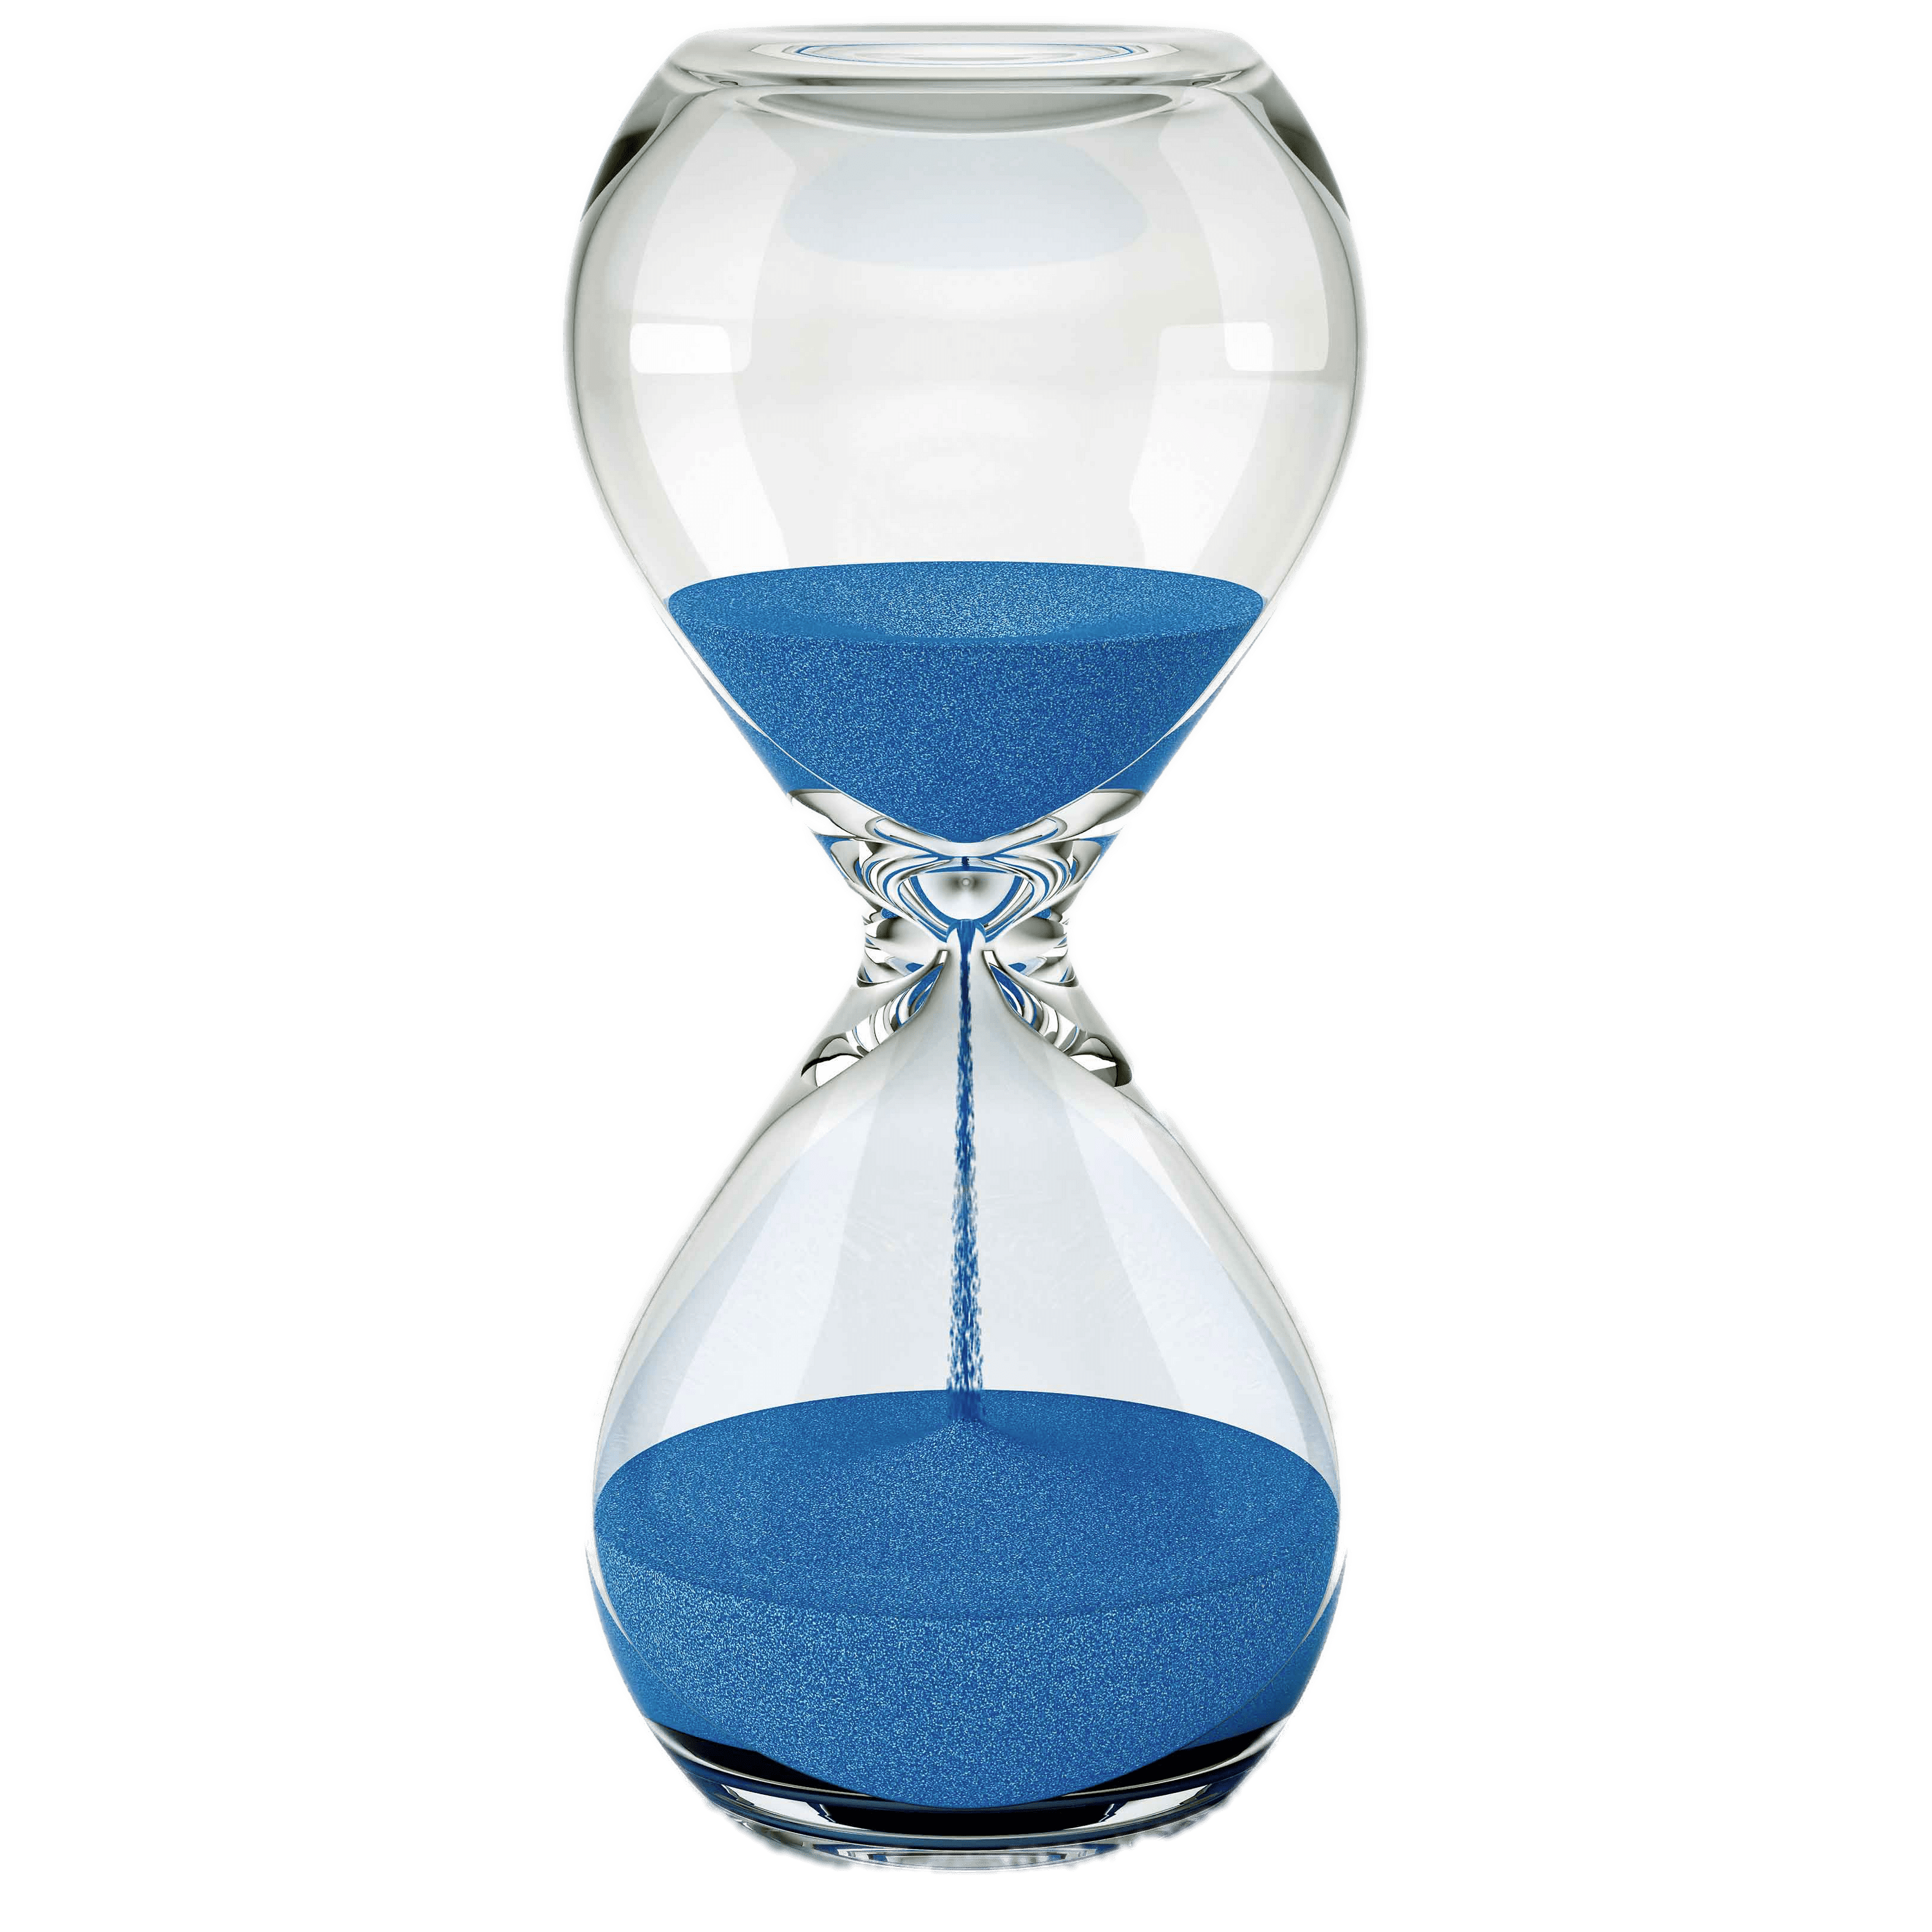 Hourglass PNG HD Quality